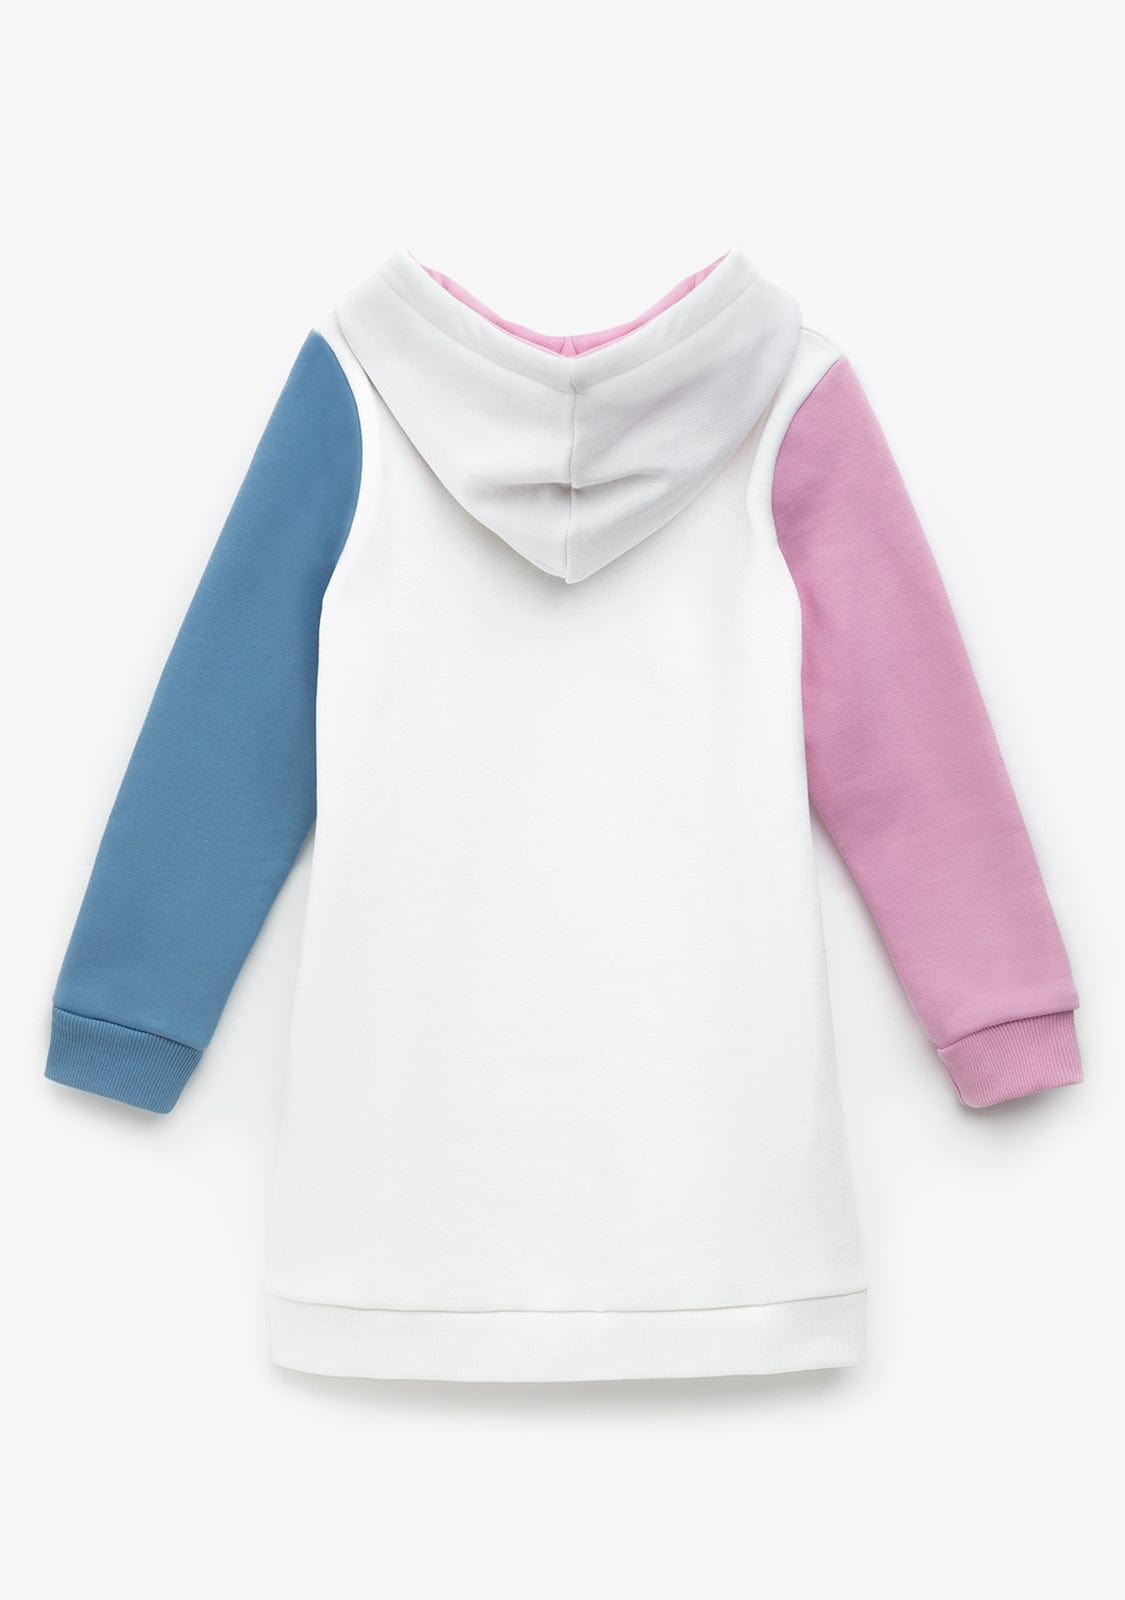 CONGUITOS TEXTIL Clothing Girl's Colour Block White Hooded Dress